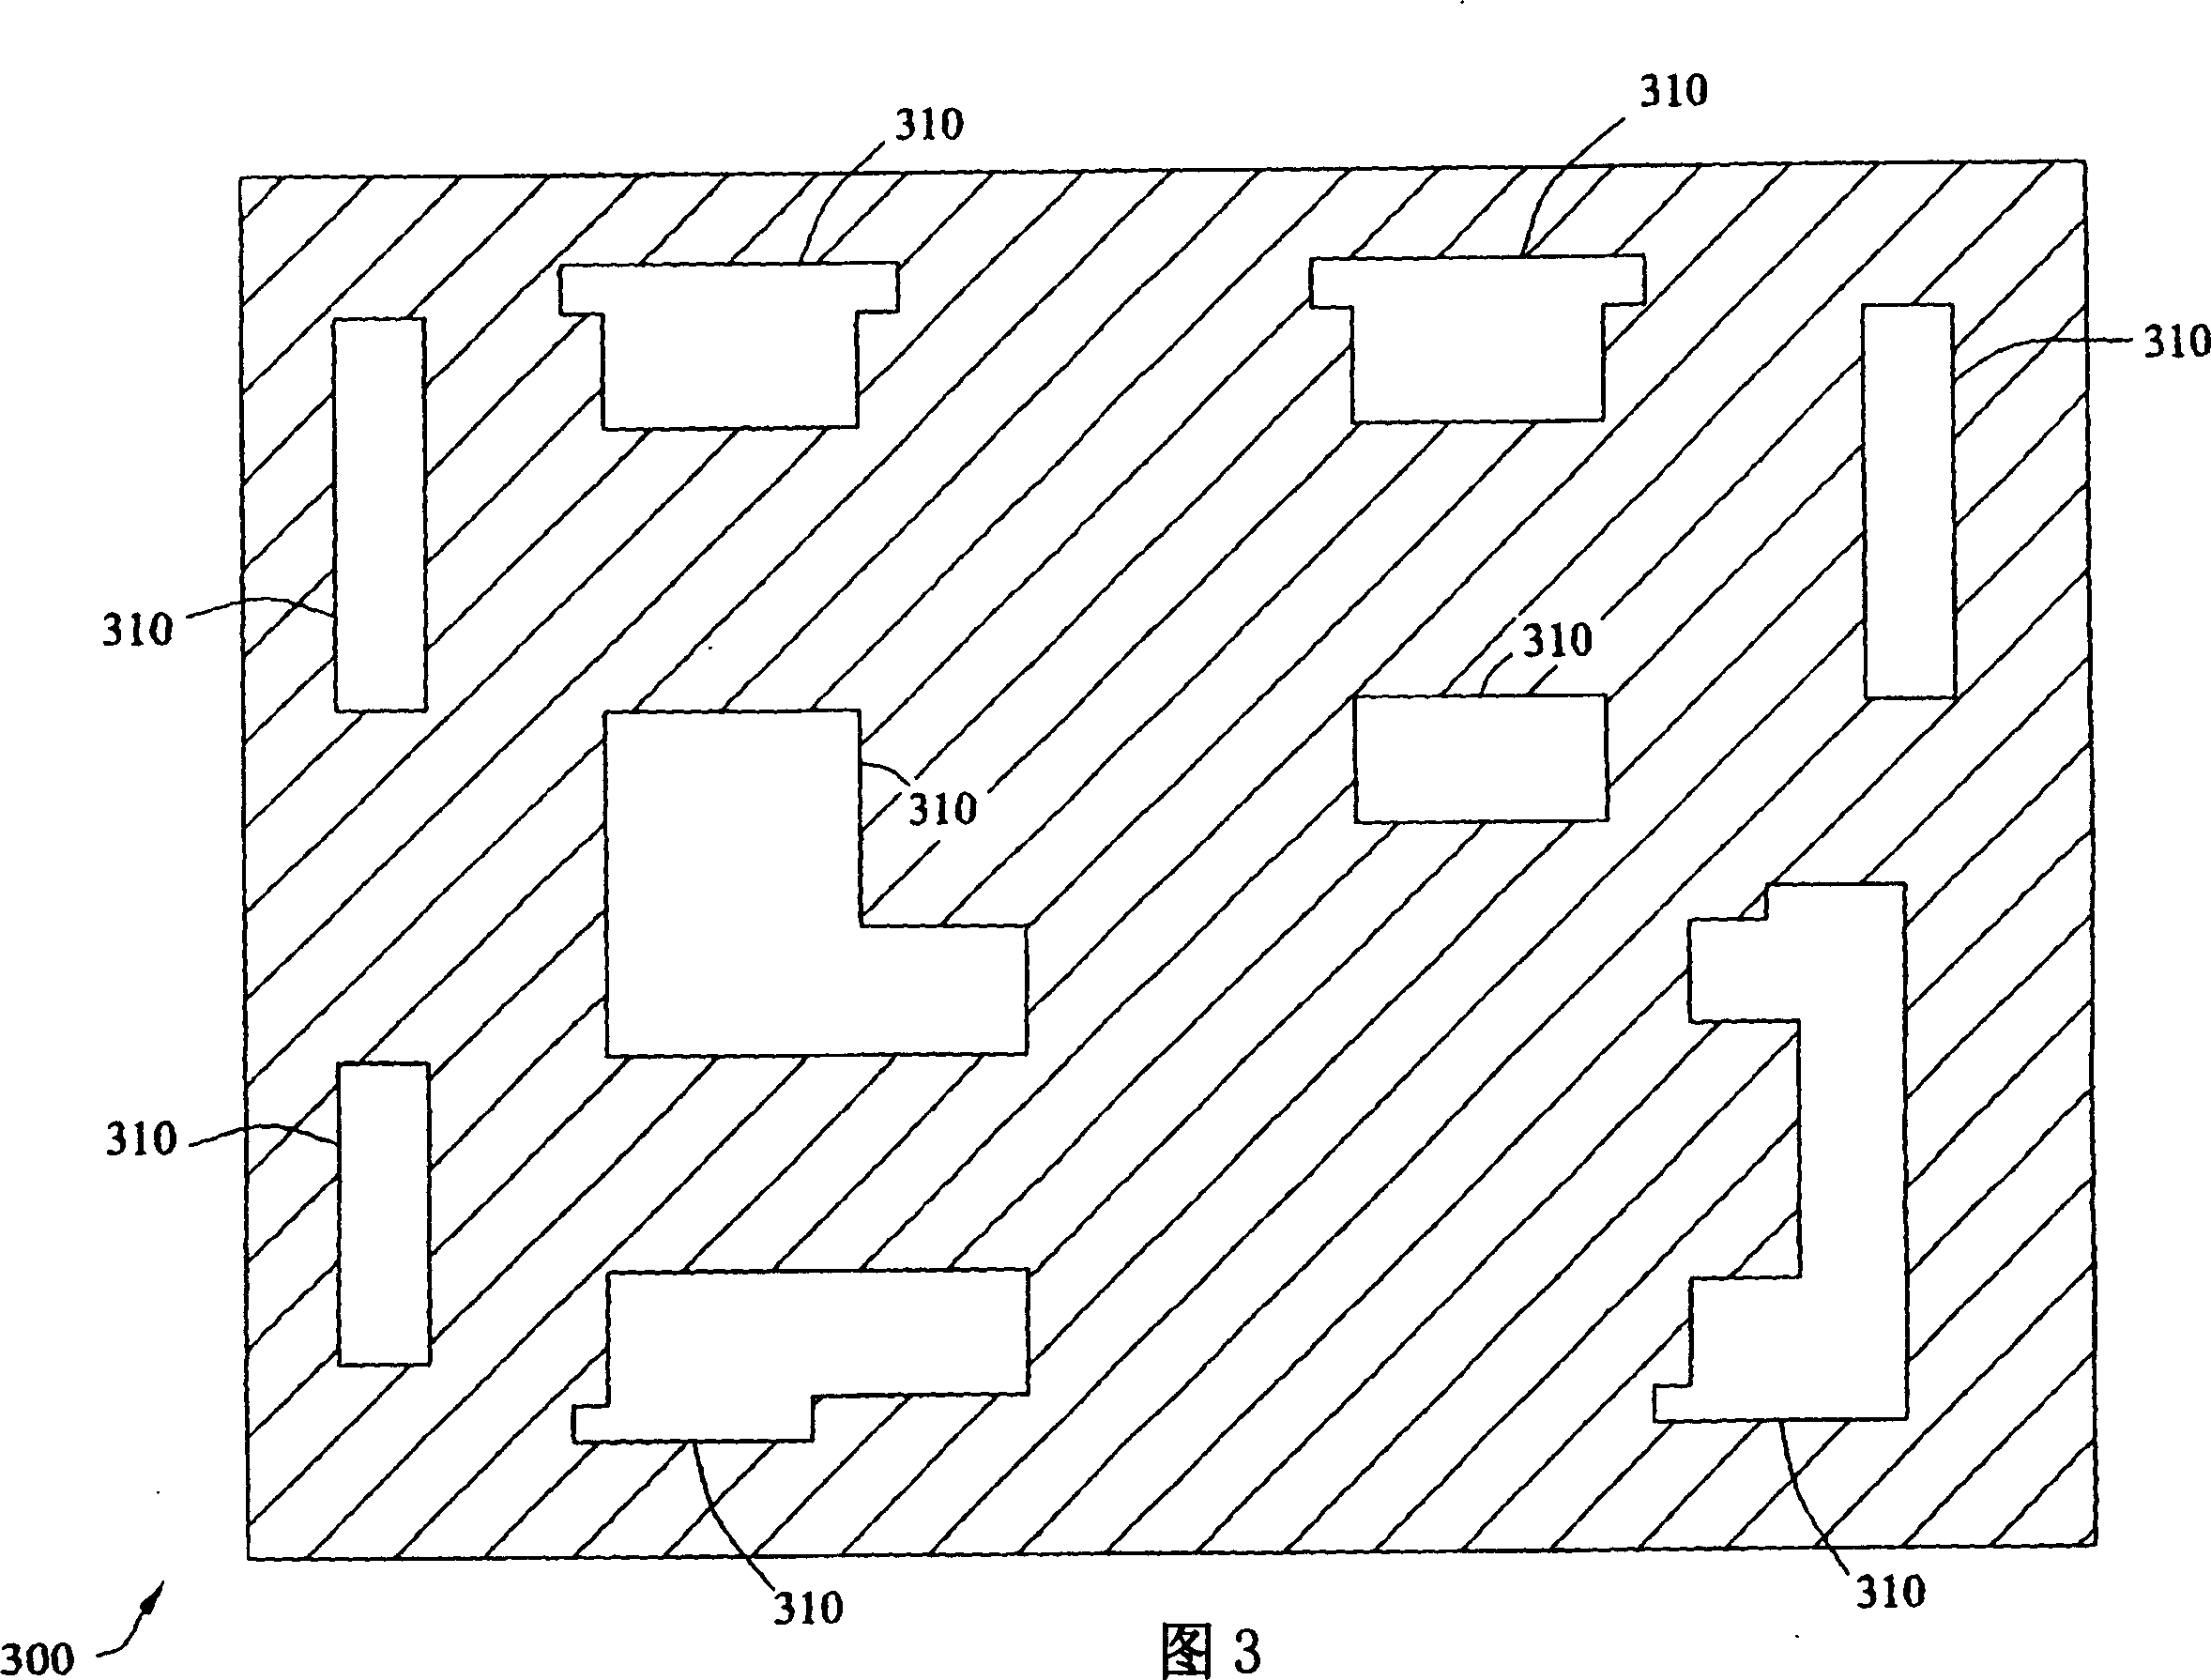 Method of enhancing clear field phase shift masks by adding parallel line to phase 0 region